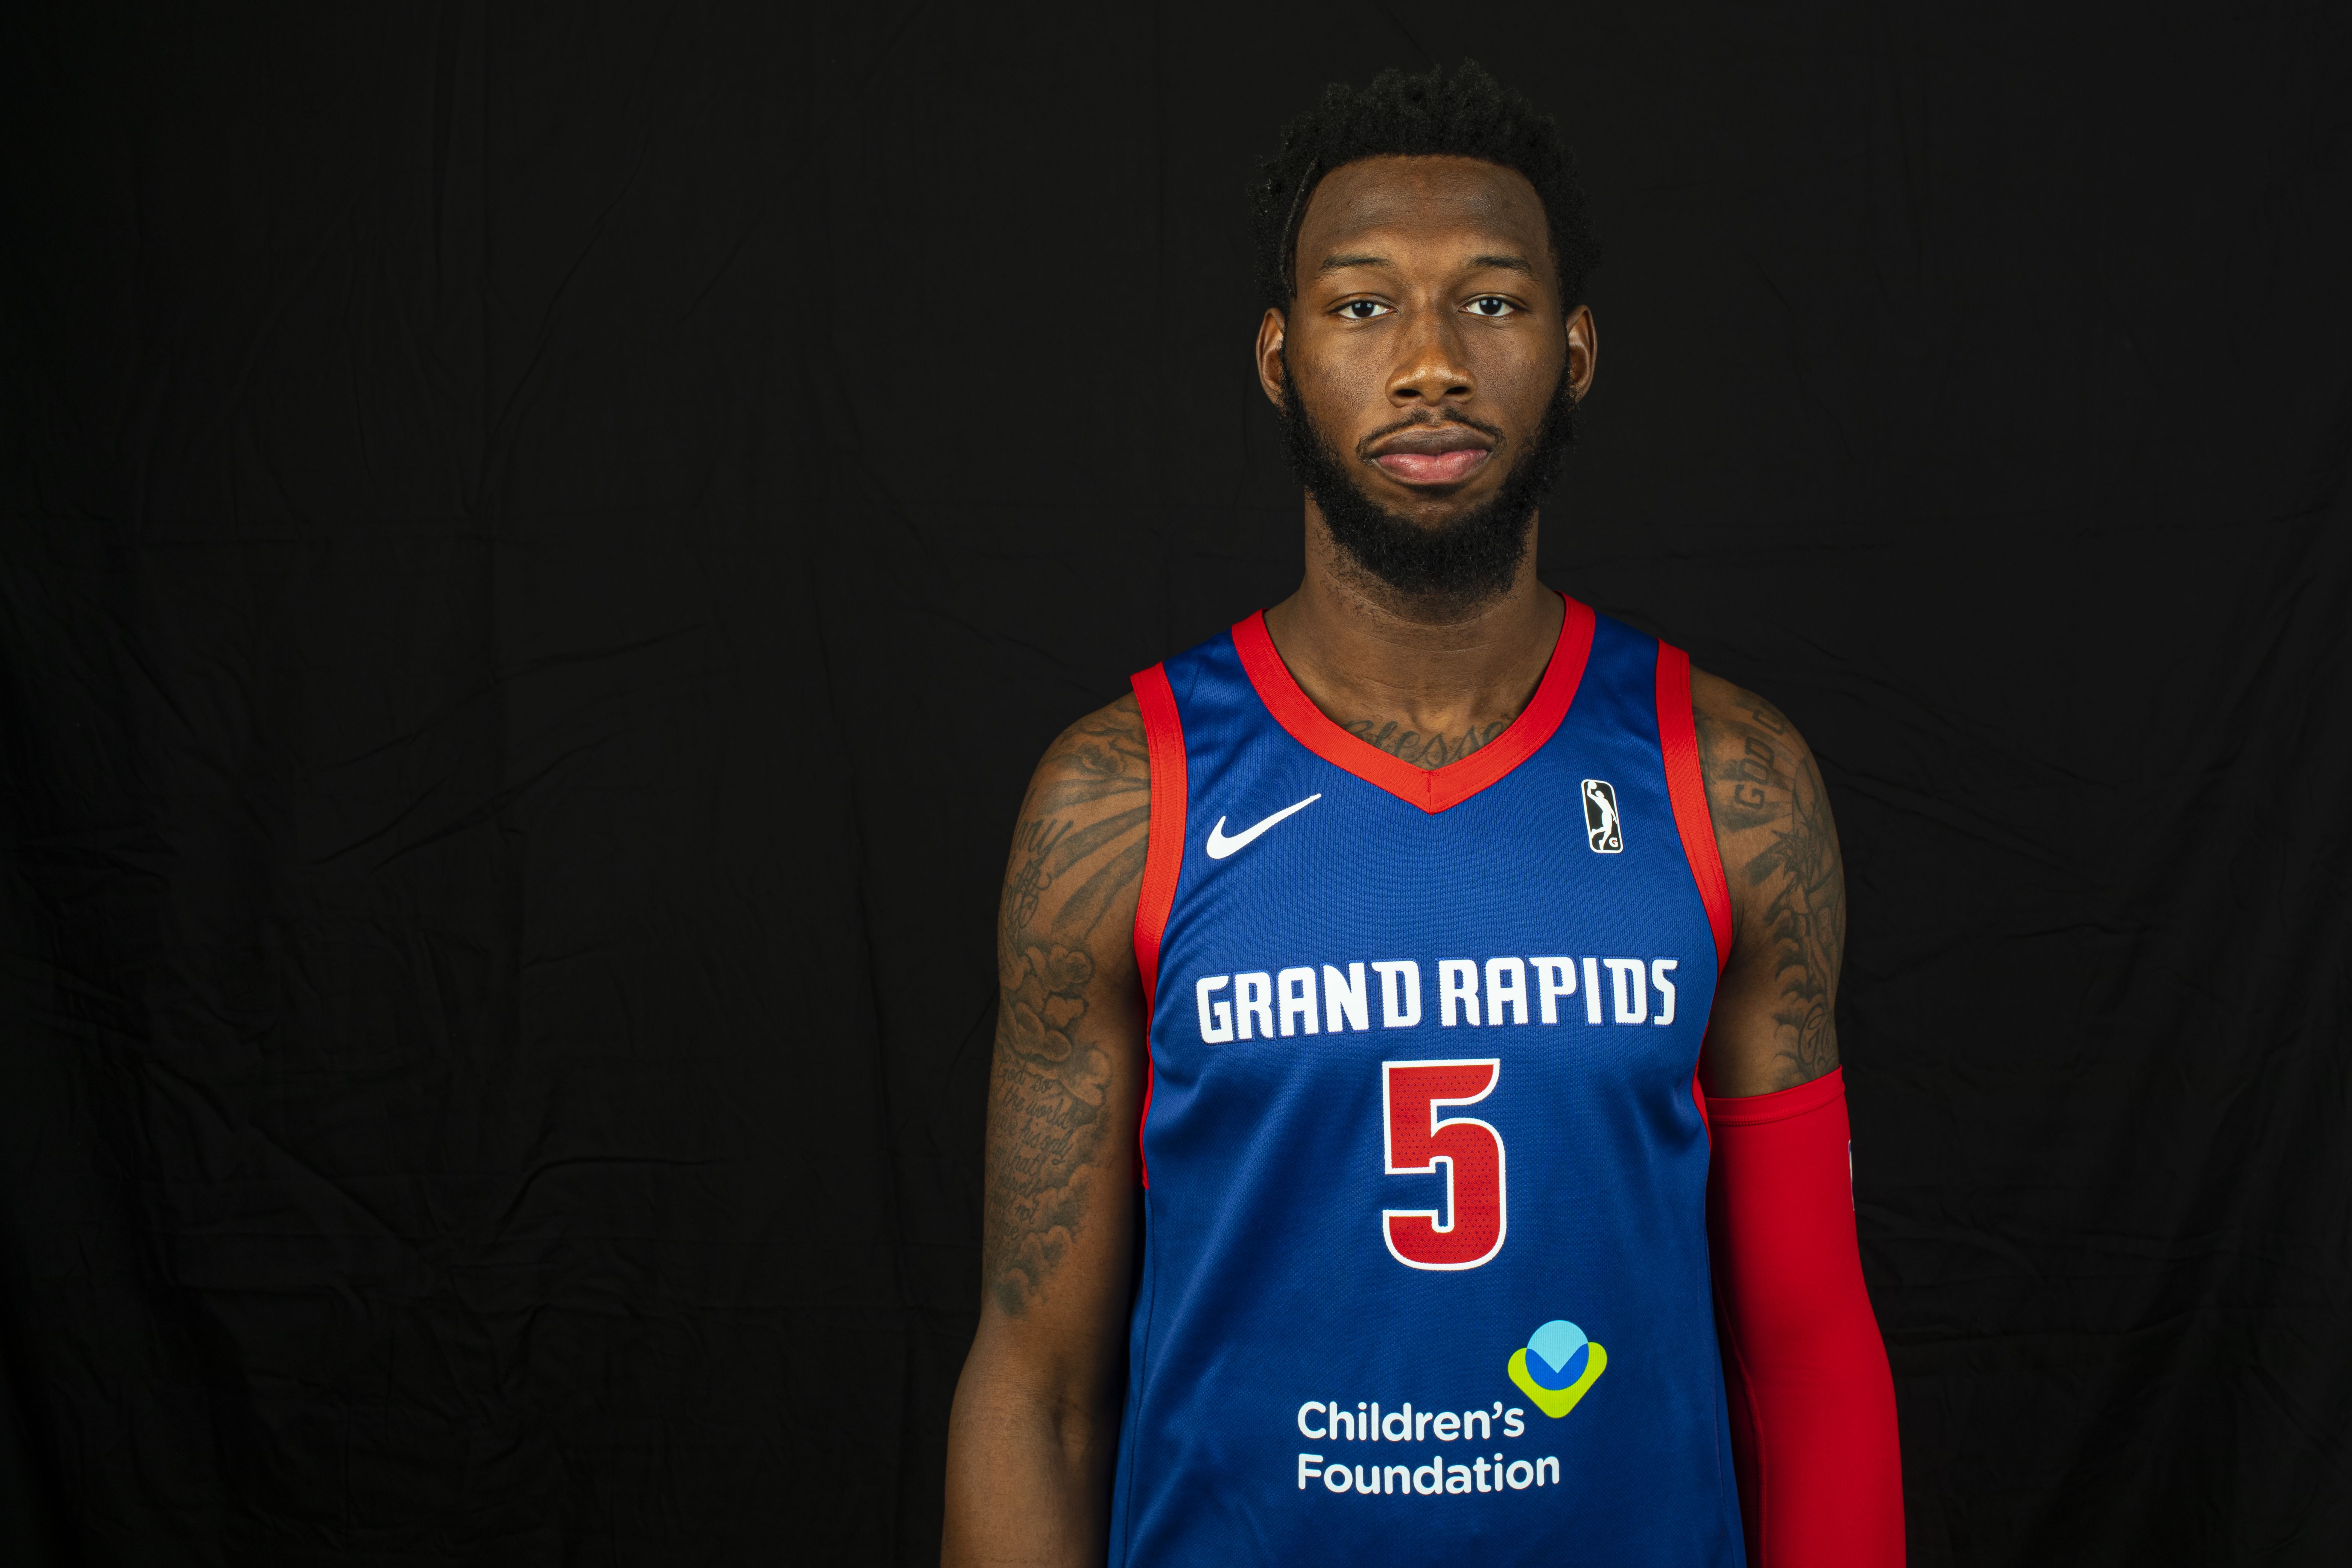 Detroit Pistons are done, so what's next for Grand Rapids Drive?